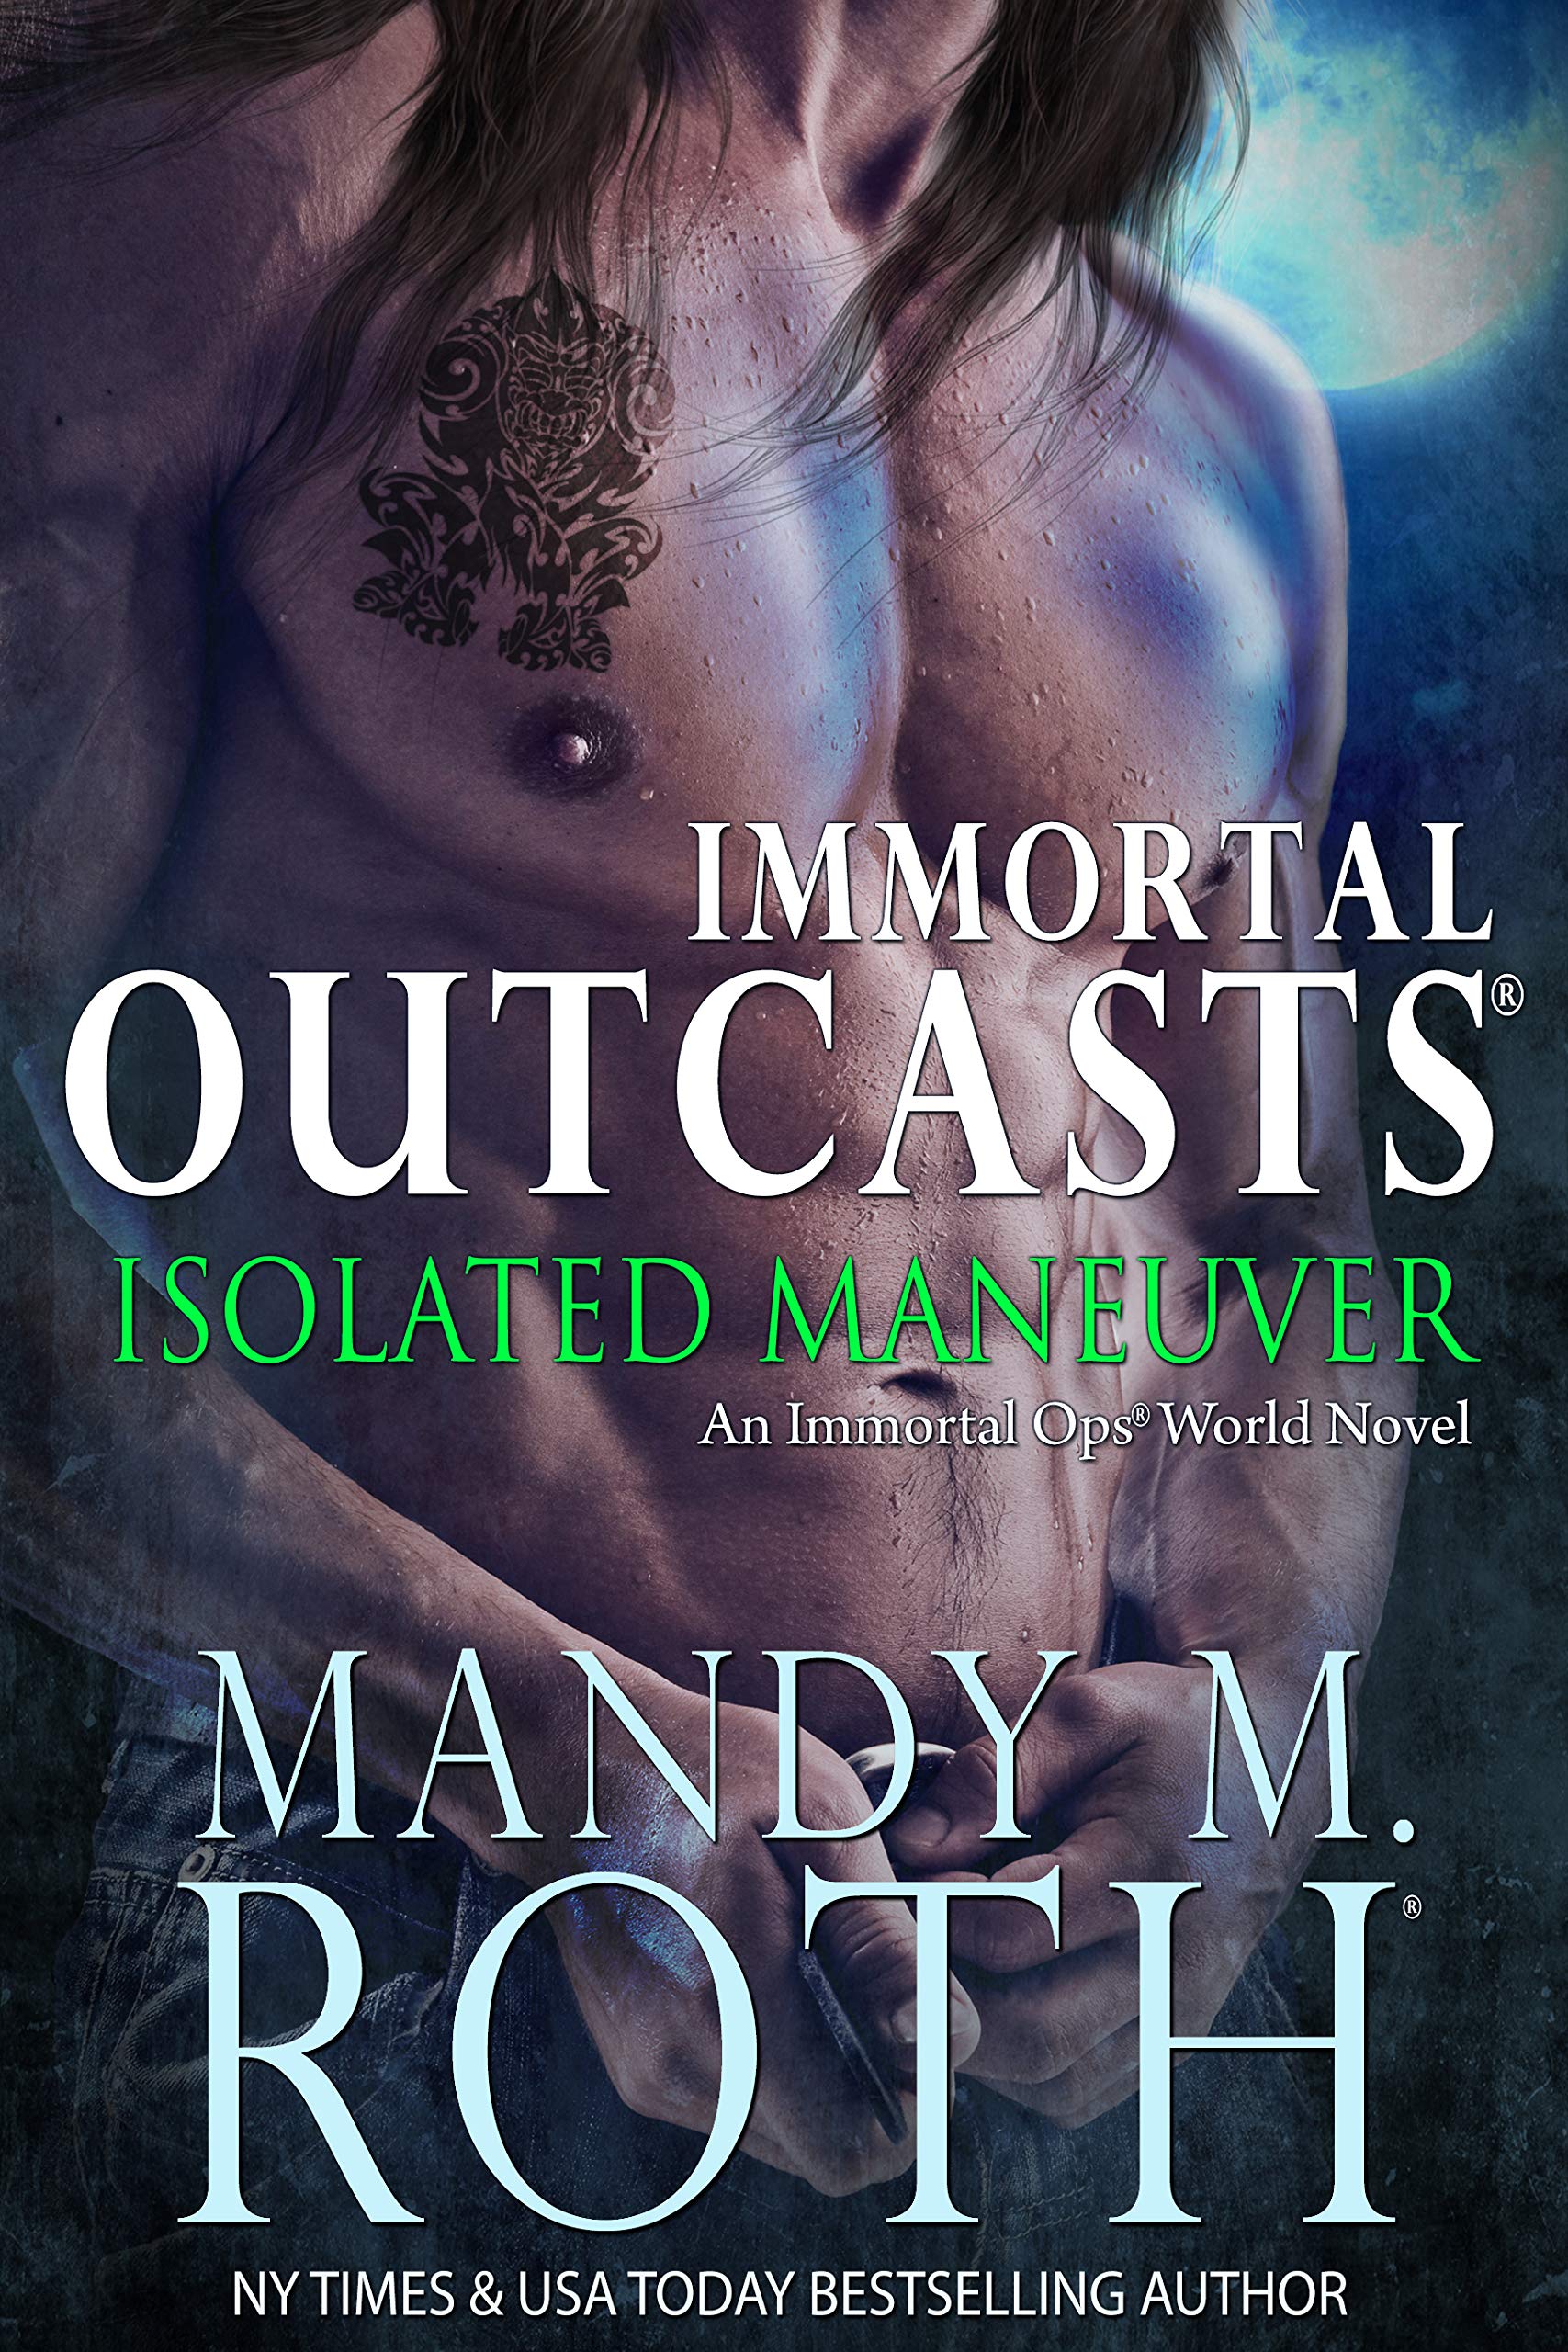 Book Cover Isolated Maneuver: An Immortal Ops World Novel (Immortal Outcasts Series Book 3)